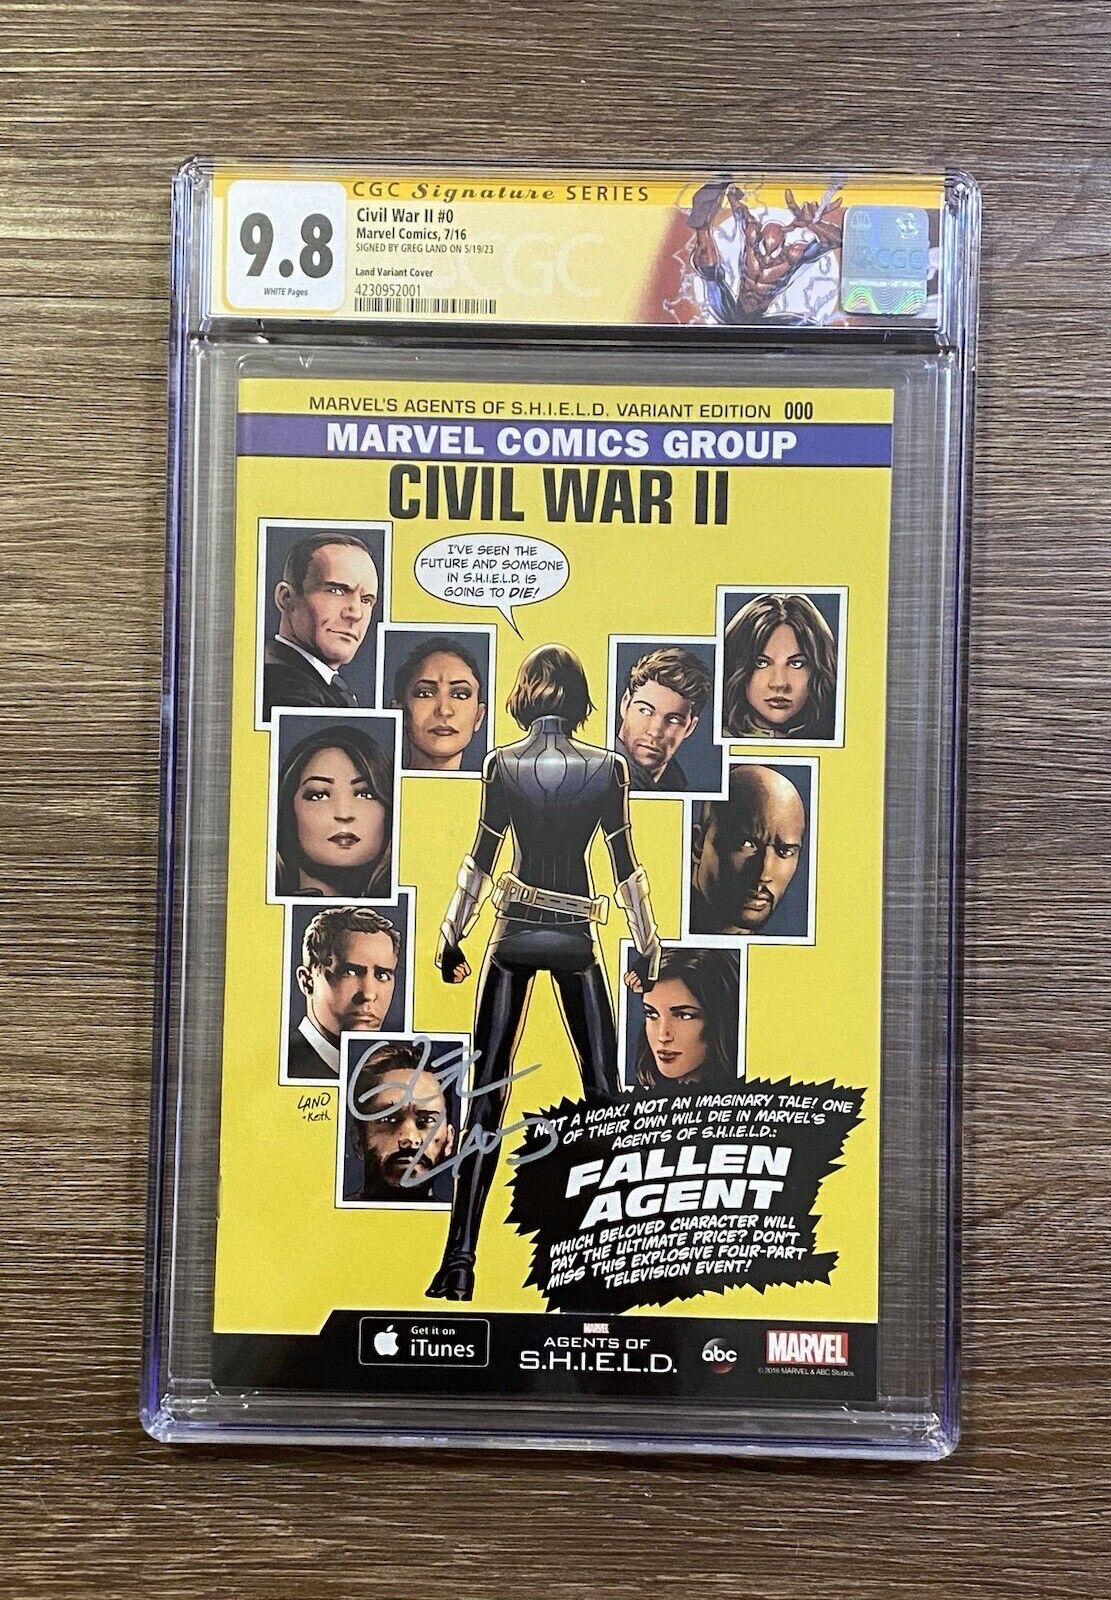 🔥Civil War II #0 CGC 9.8 Signed by Land Variant Marvel Agents of SHIELD Cover🔥